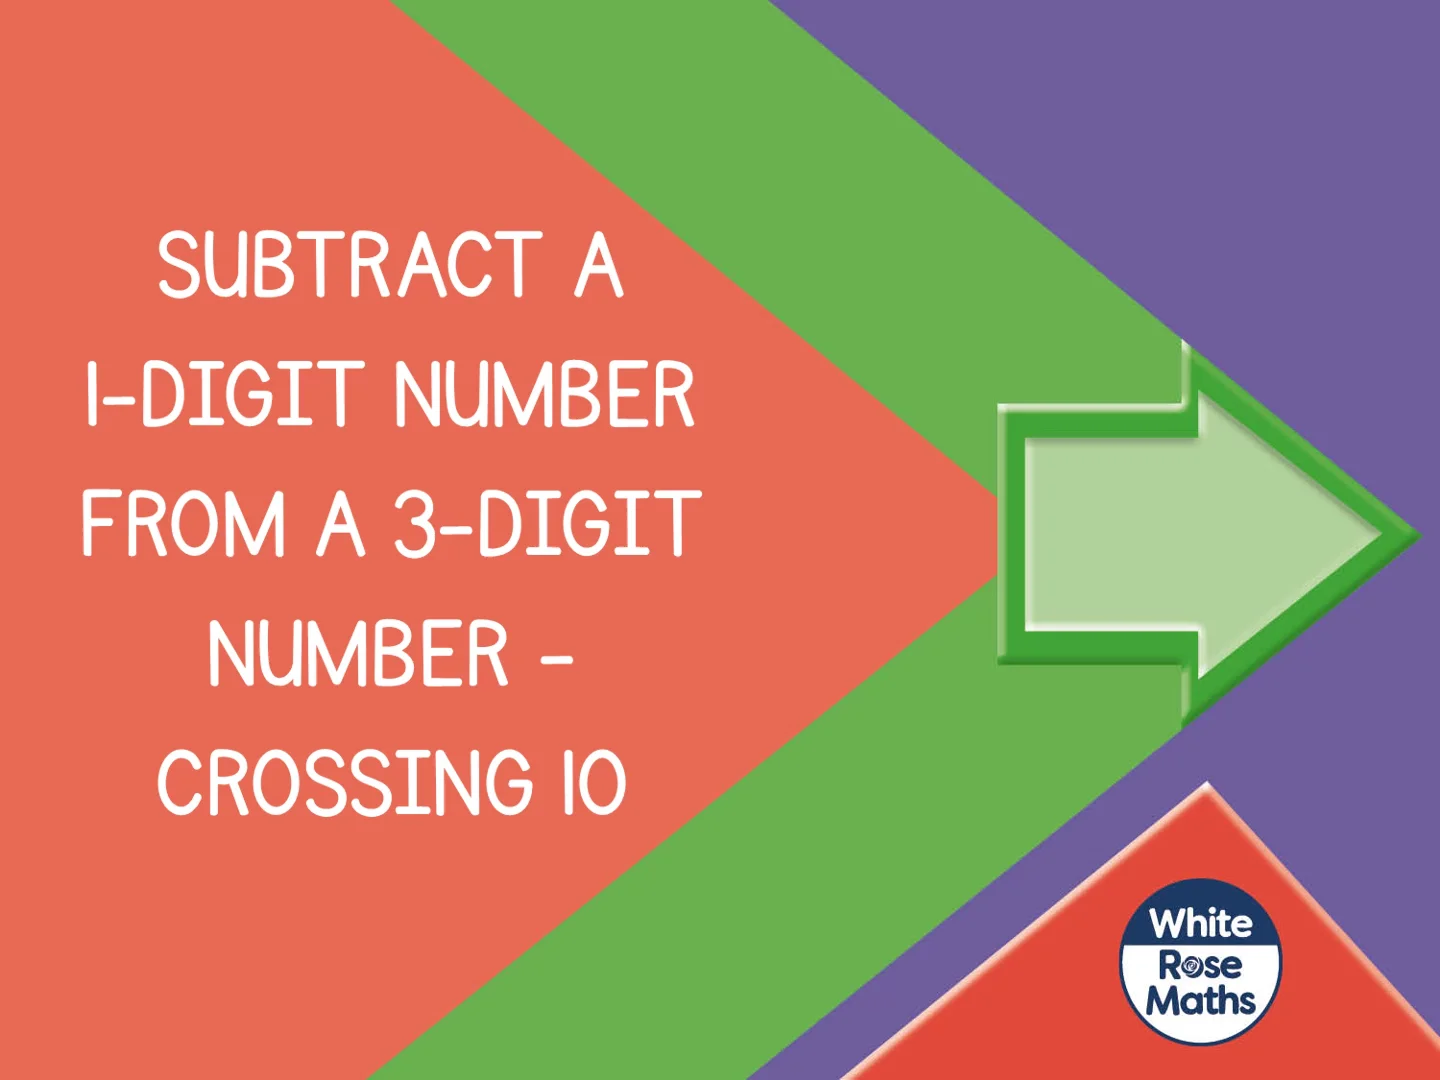 aut3-5-2-subtract-a-1-digit-number-from-a-3-digit-number-crossing